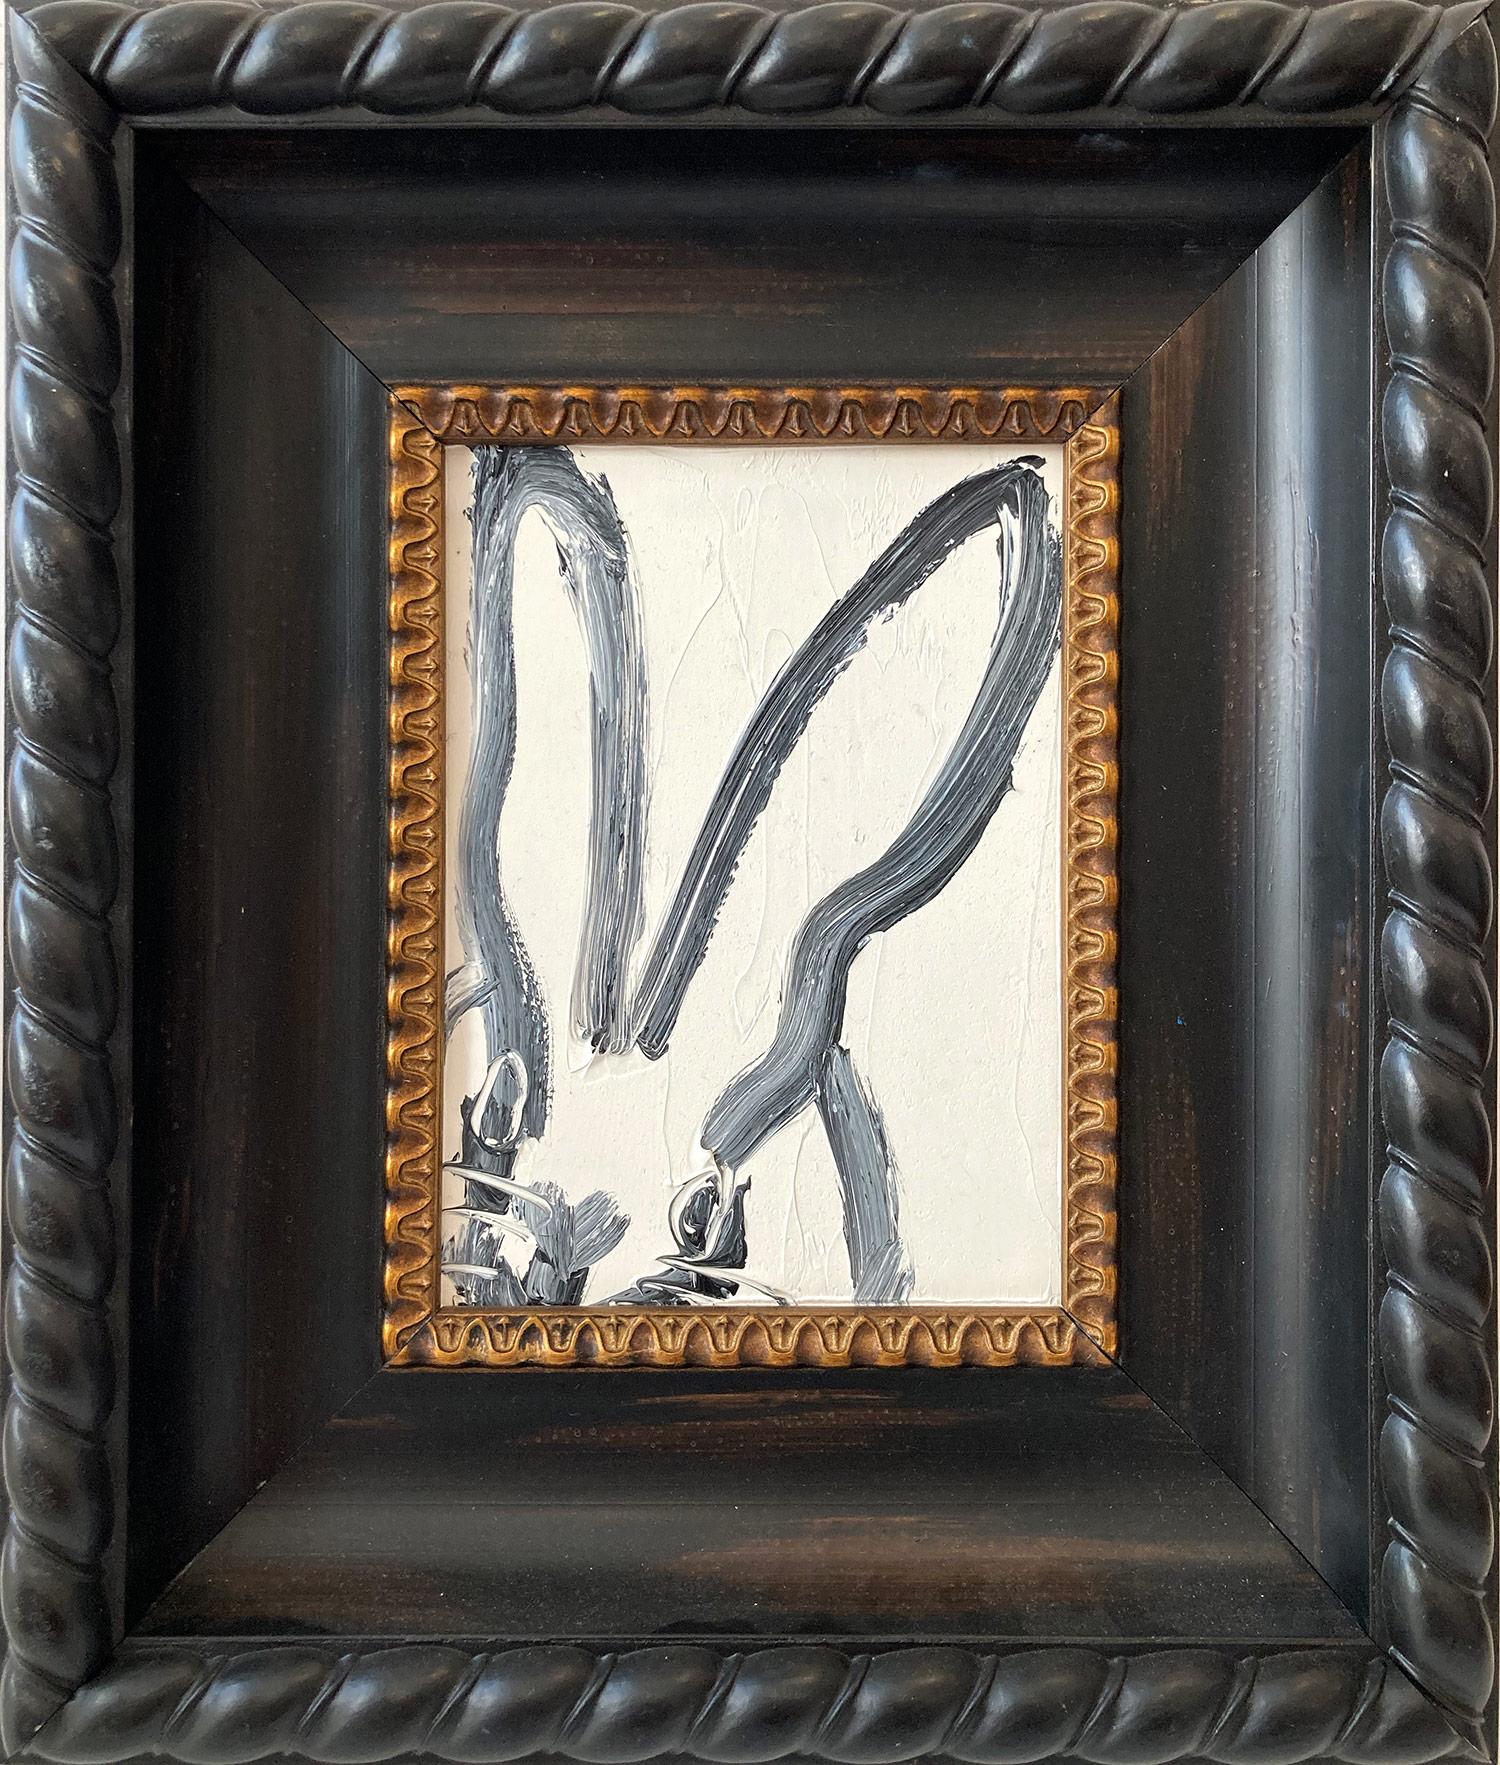 Hunt Slonem Abstract Painting - "Julia" (Black Outlined Bunny on White Background Oil Painting on Wood Panel)